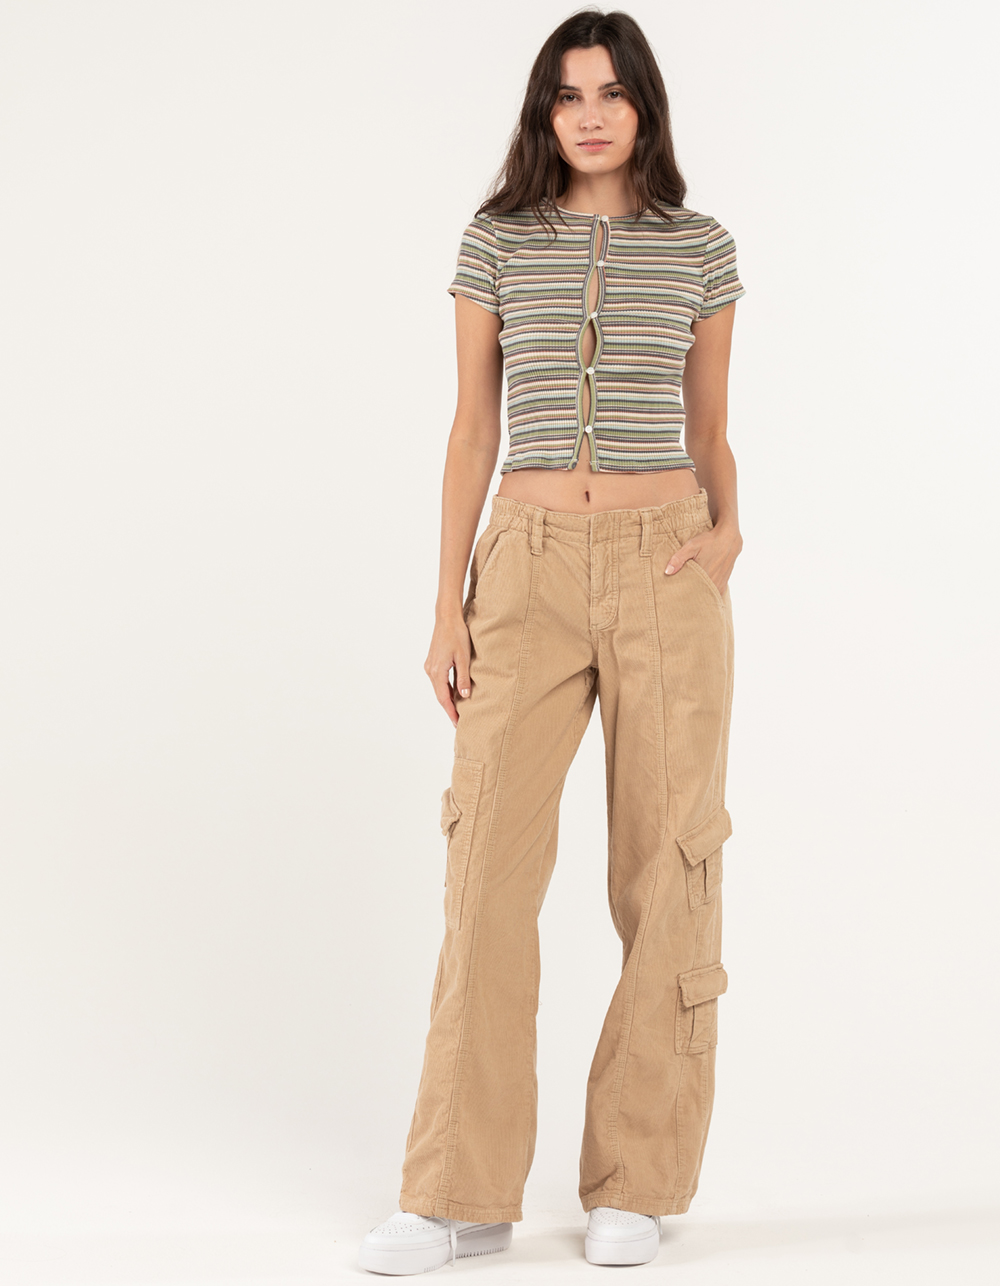 summer Advise Explicitly BDG Urban Outfitters Y2k Corduroy Cargo Pants - KHAKI | Tillys